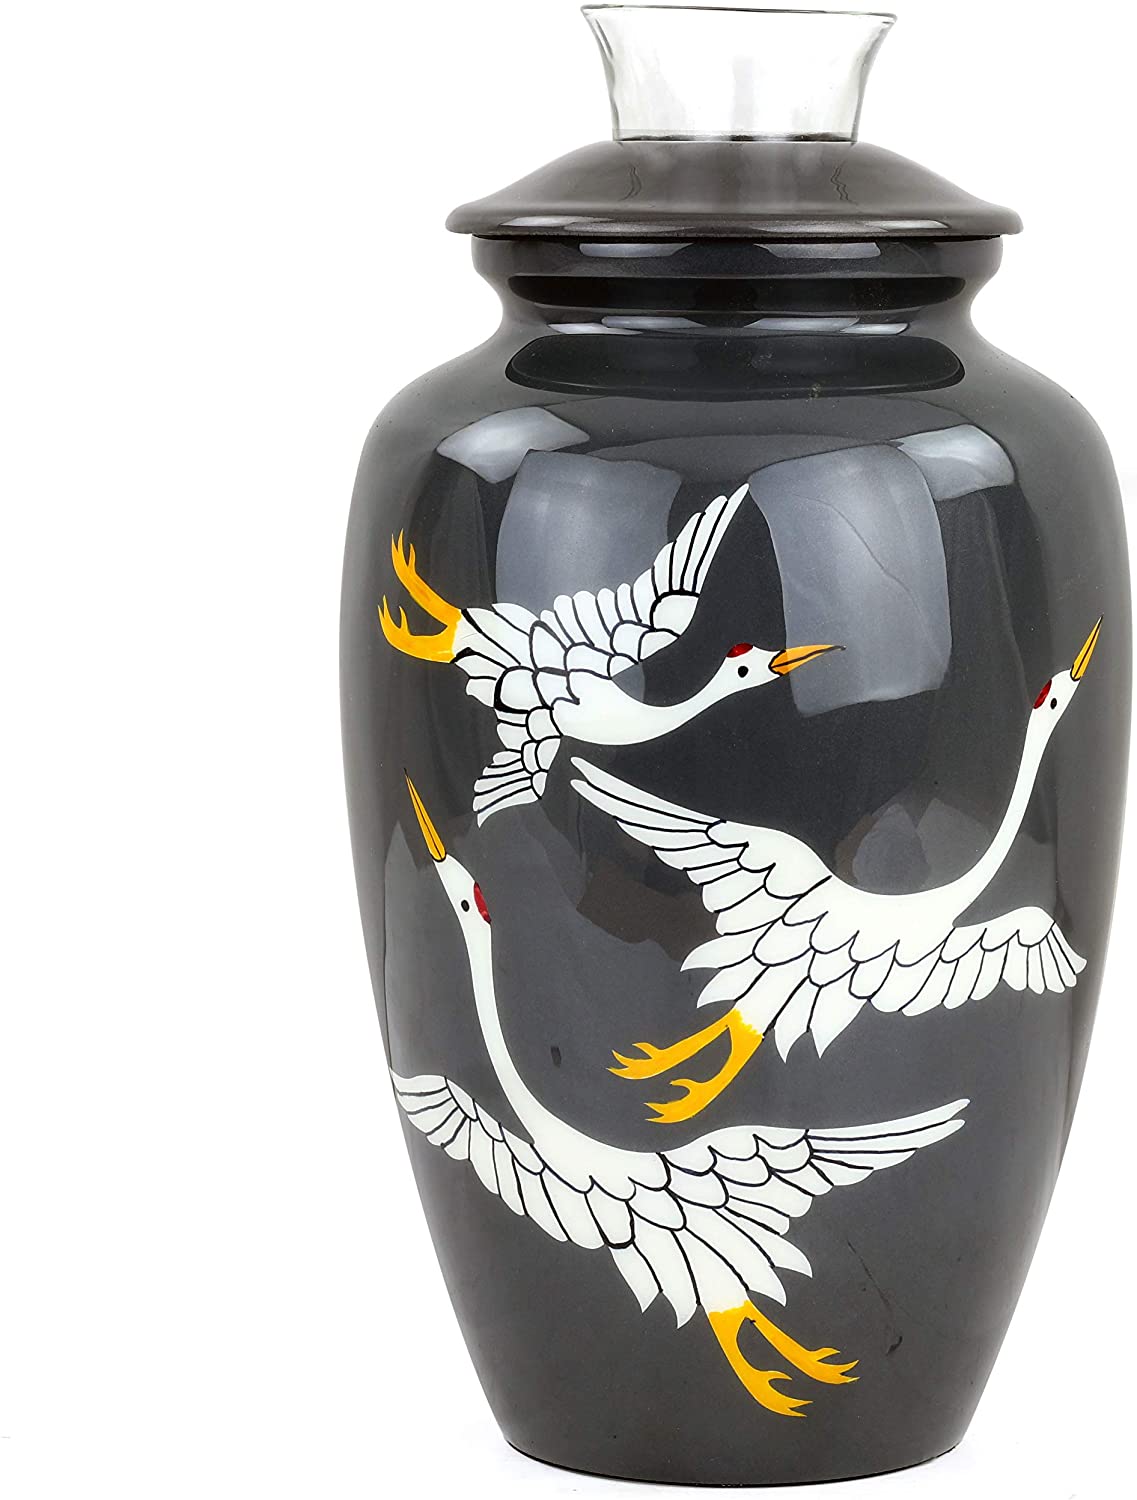 10" Black Aluminum Cremation Urn Handcrafted | Funeral Pot for Ash Storage | Ash Storage Container for Adult & Pet Loss | Beautiful Crane Birds Elegant Design | Condolence Gifts Ideass